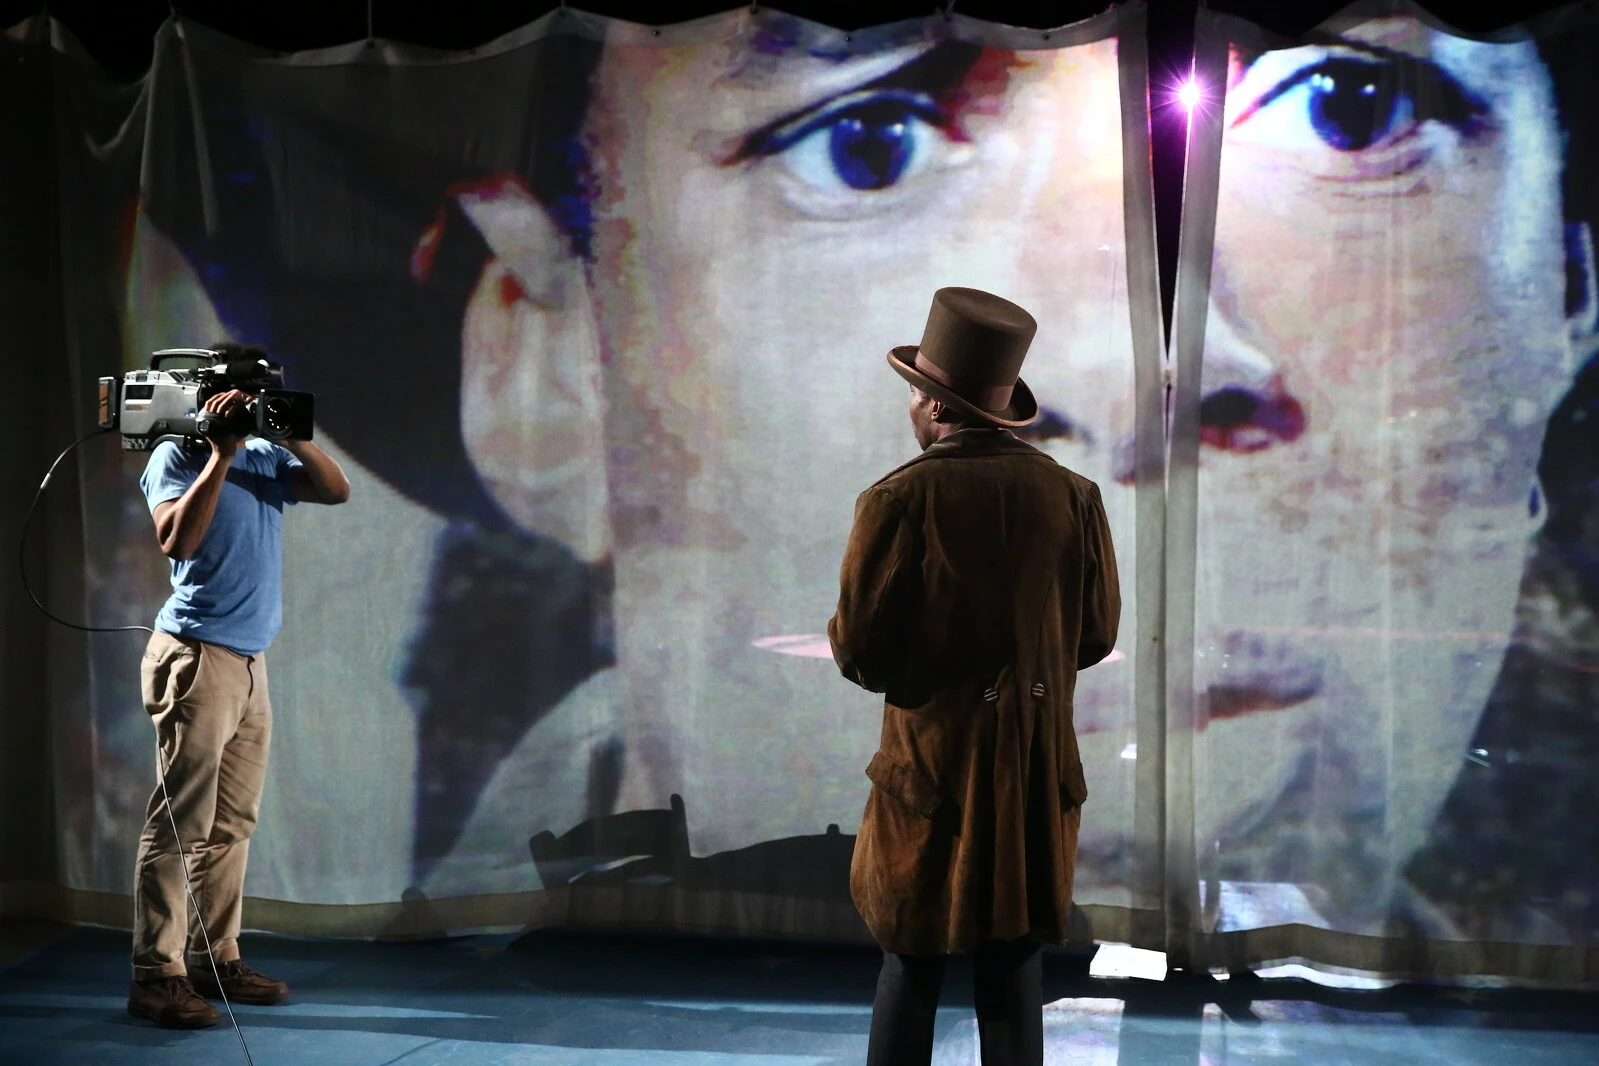 A person turned away from the camera in a top hat looks towards another person holding a video camera and a large screen displaying a man's head